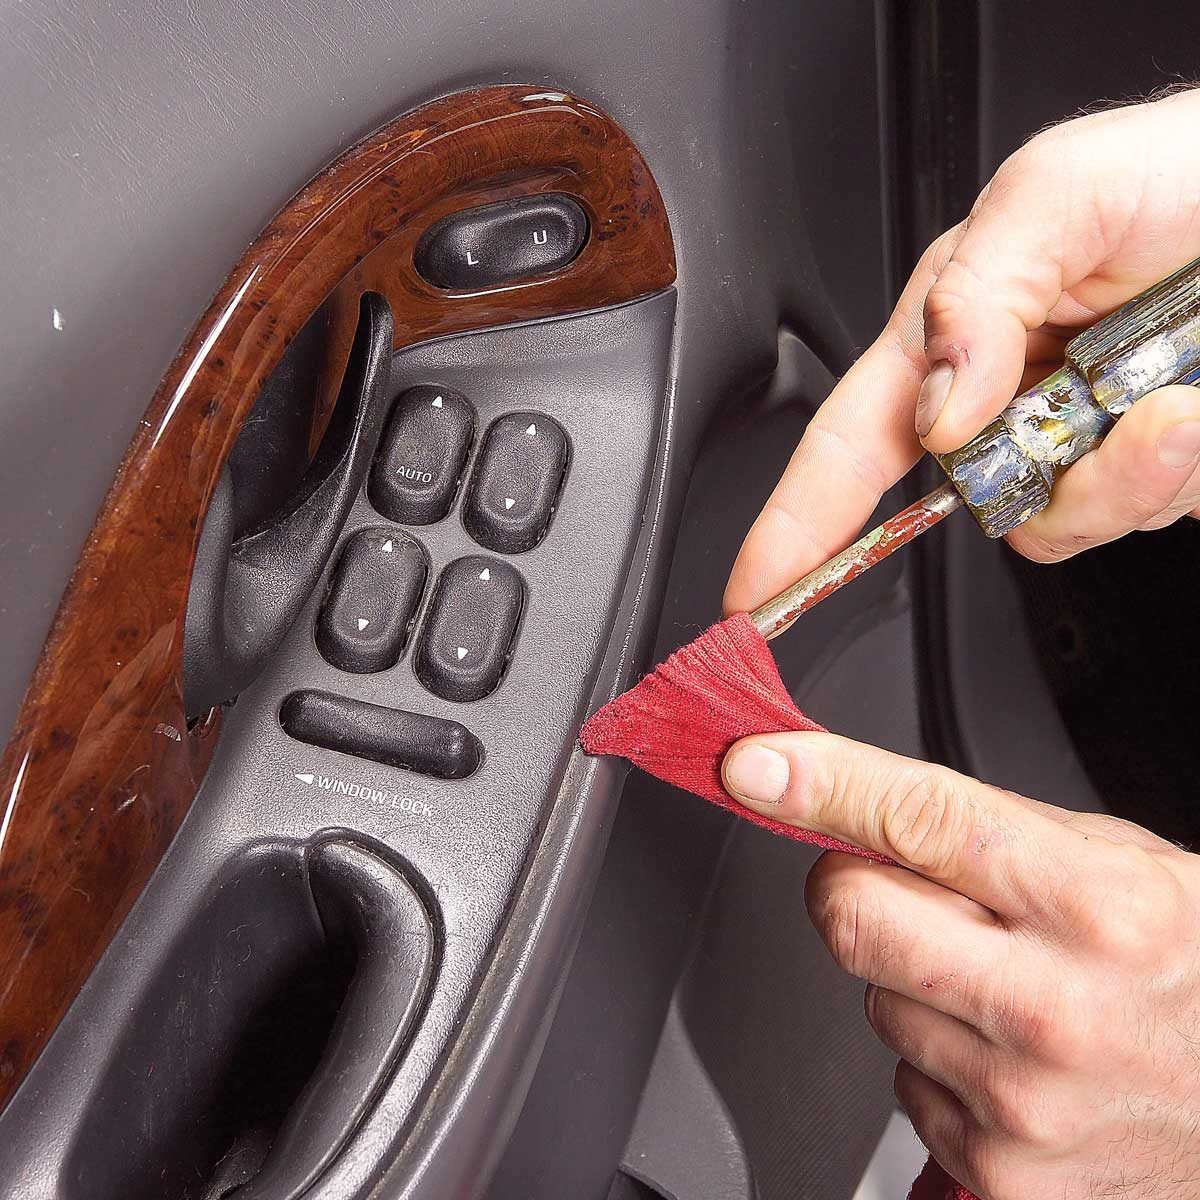 46 DIY Car Detailing Tips That Will Save You Money